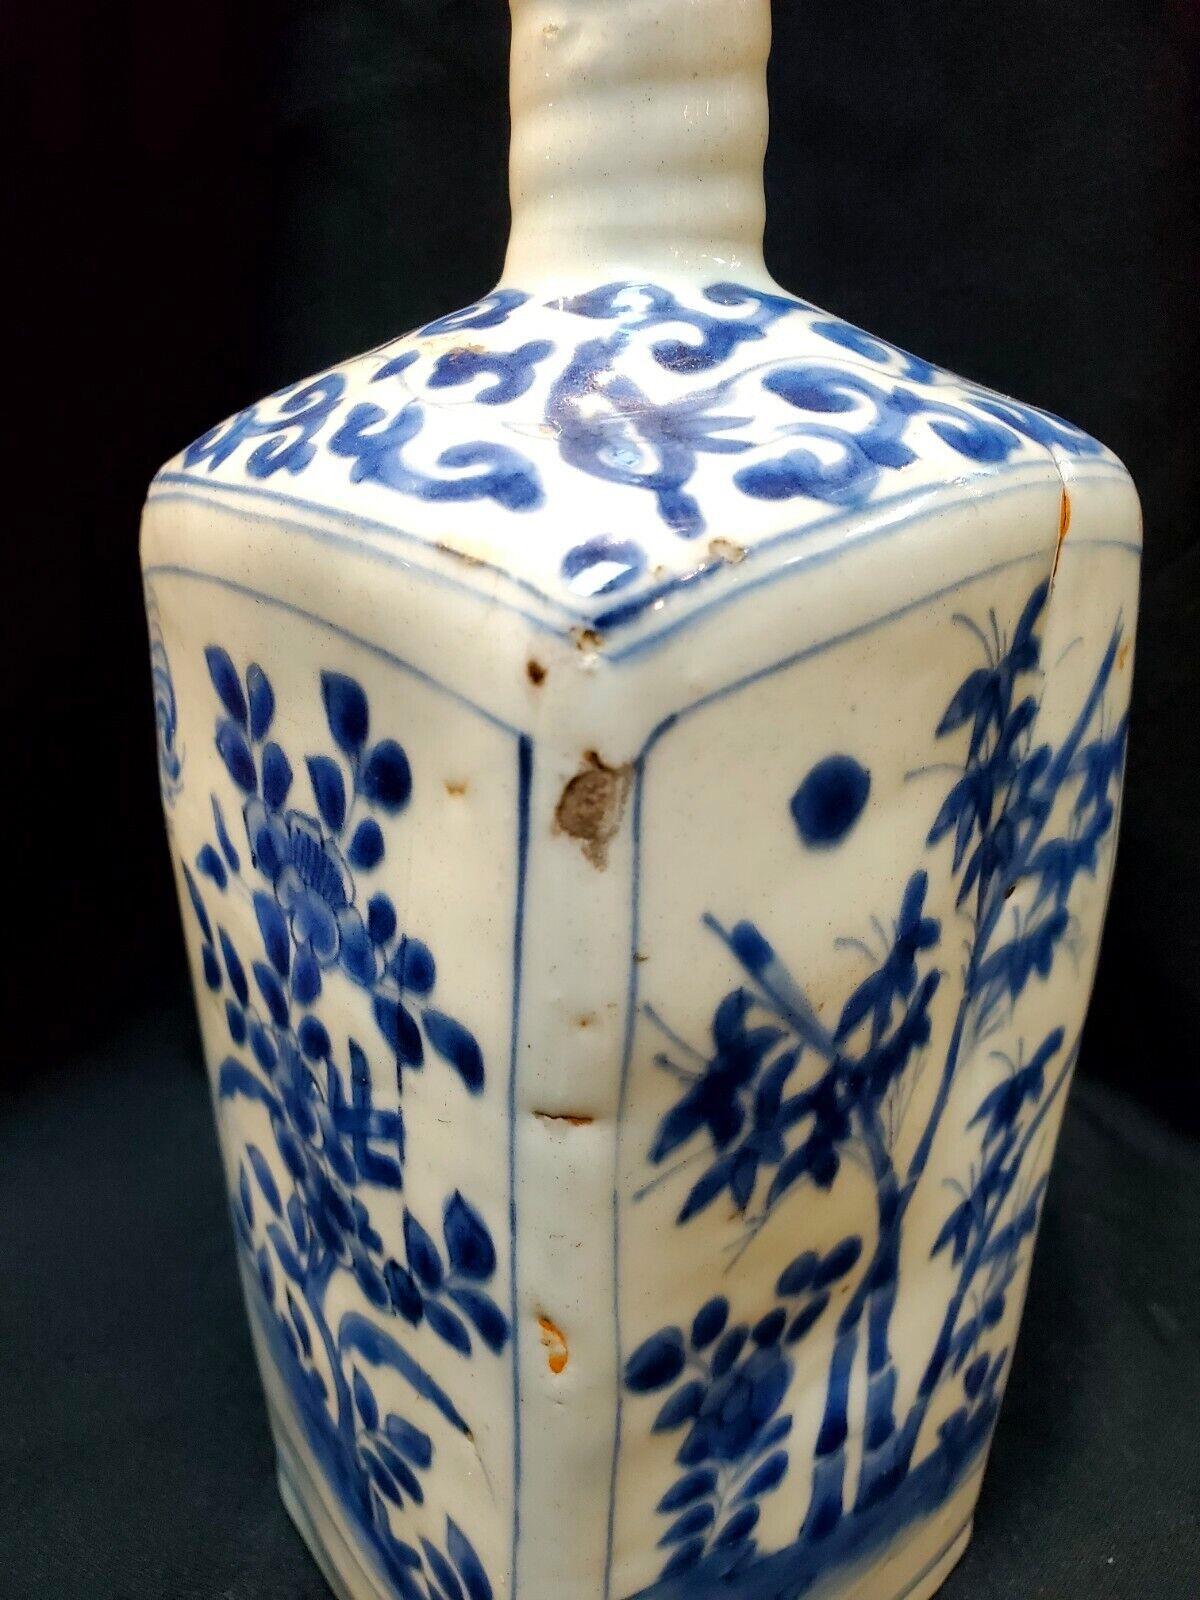 Ming, JiaJing period blue and white four gentlemen among flower painting porcelain square vase / ?,??????????(??,???)
Item measurement:Approximate H:10inch, W:3.75 inch
Material: Blue and white porcelain 
Condition:As antique porcelain shows